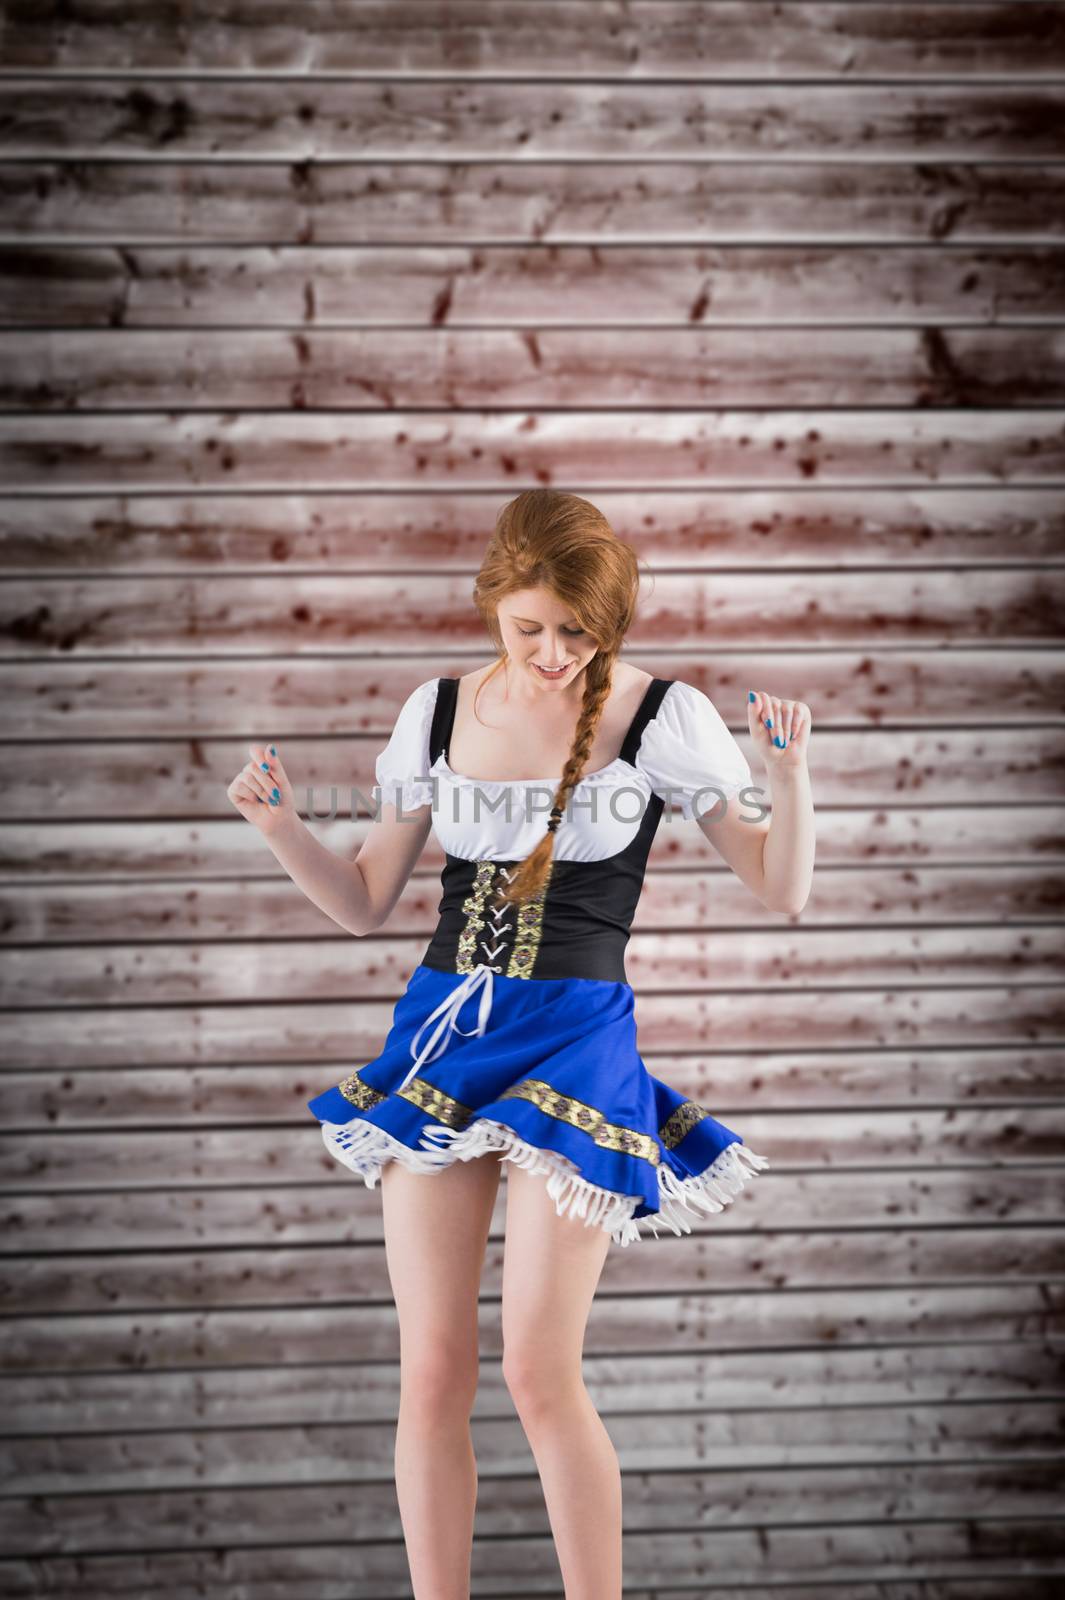 Oktoberfest girl moving and dancing against wooden planks